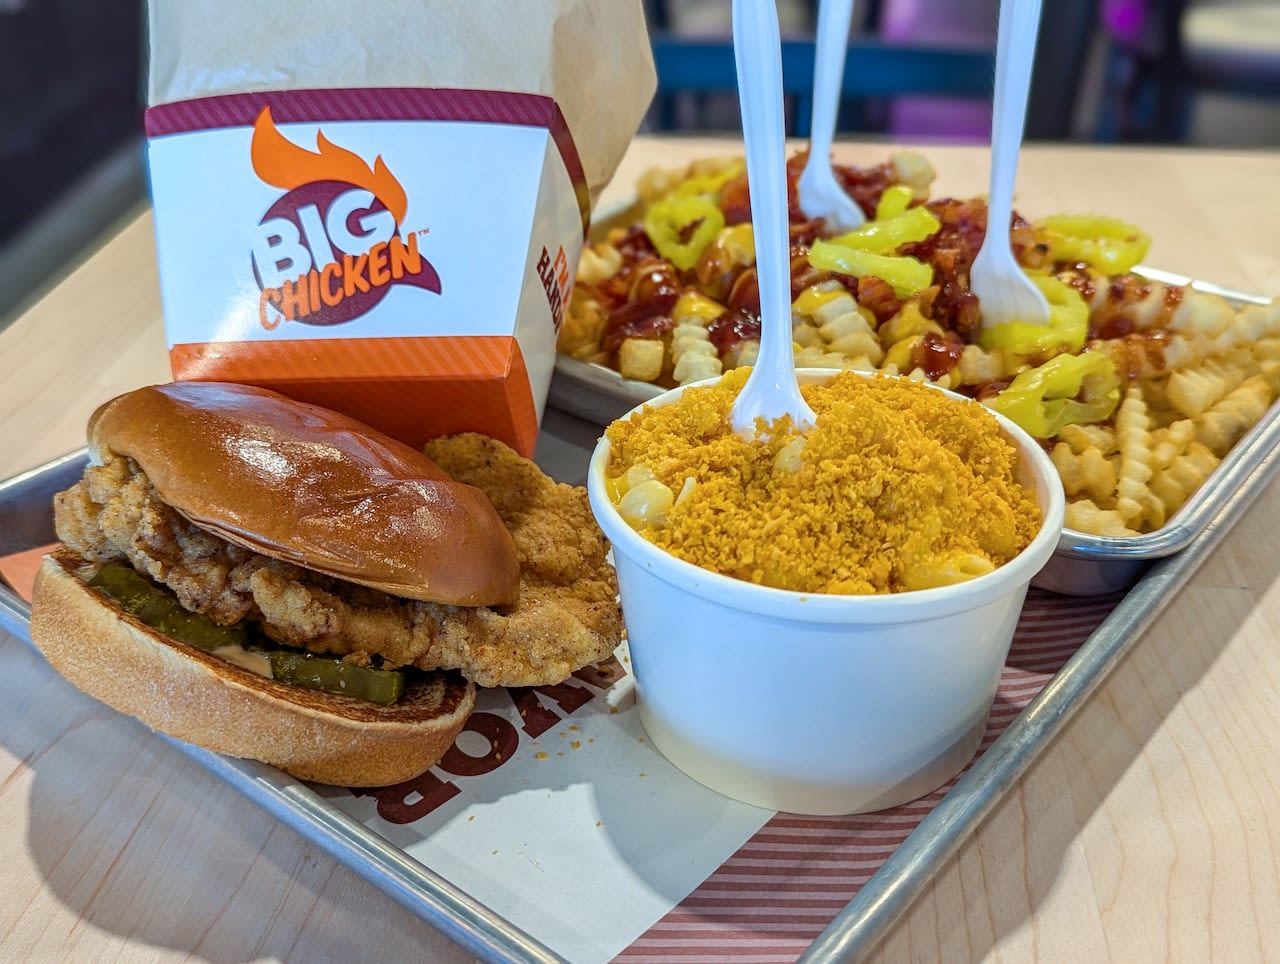 I ate at Shaq’s new Big Chicken restaurant in Mass. Here’s what it’s like.